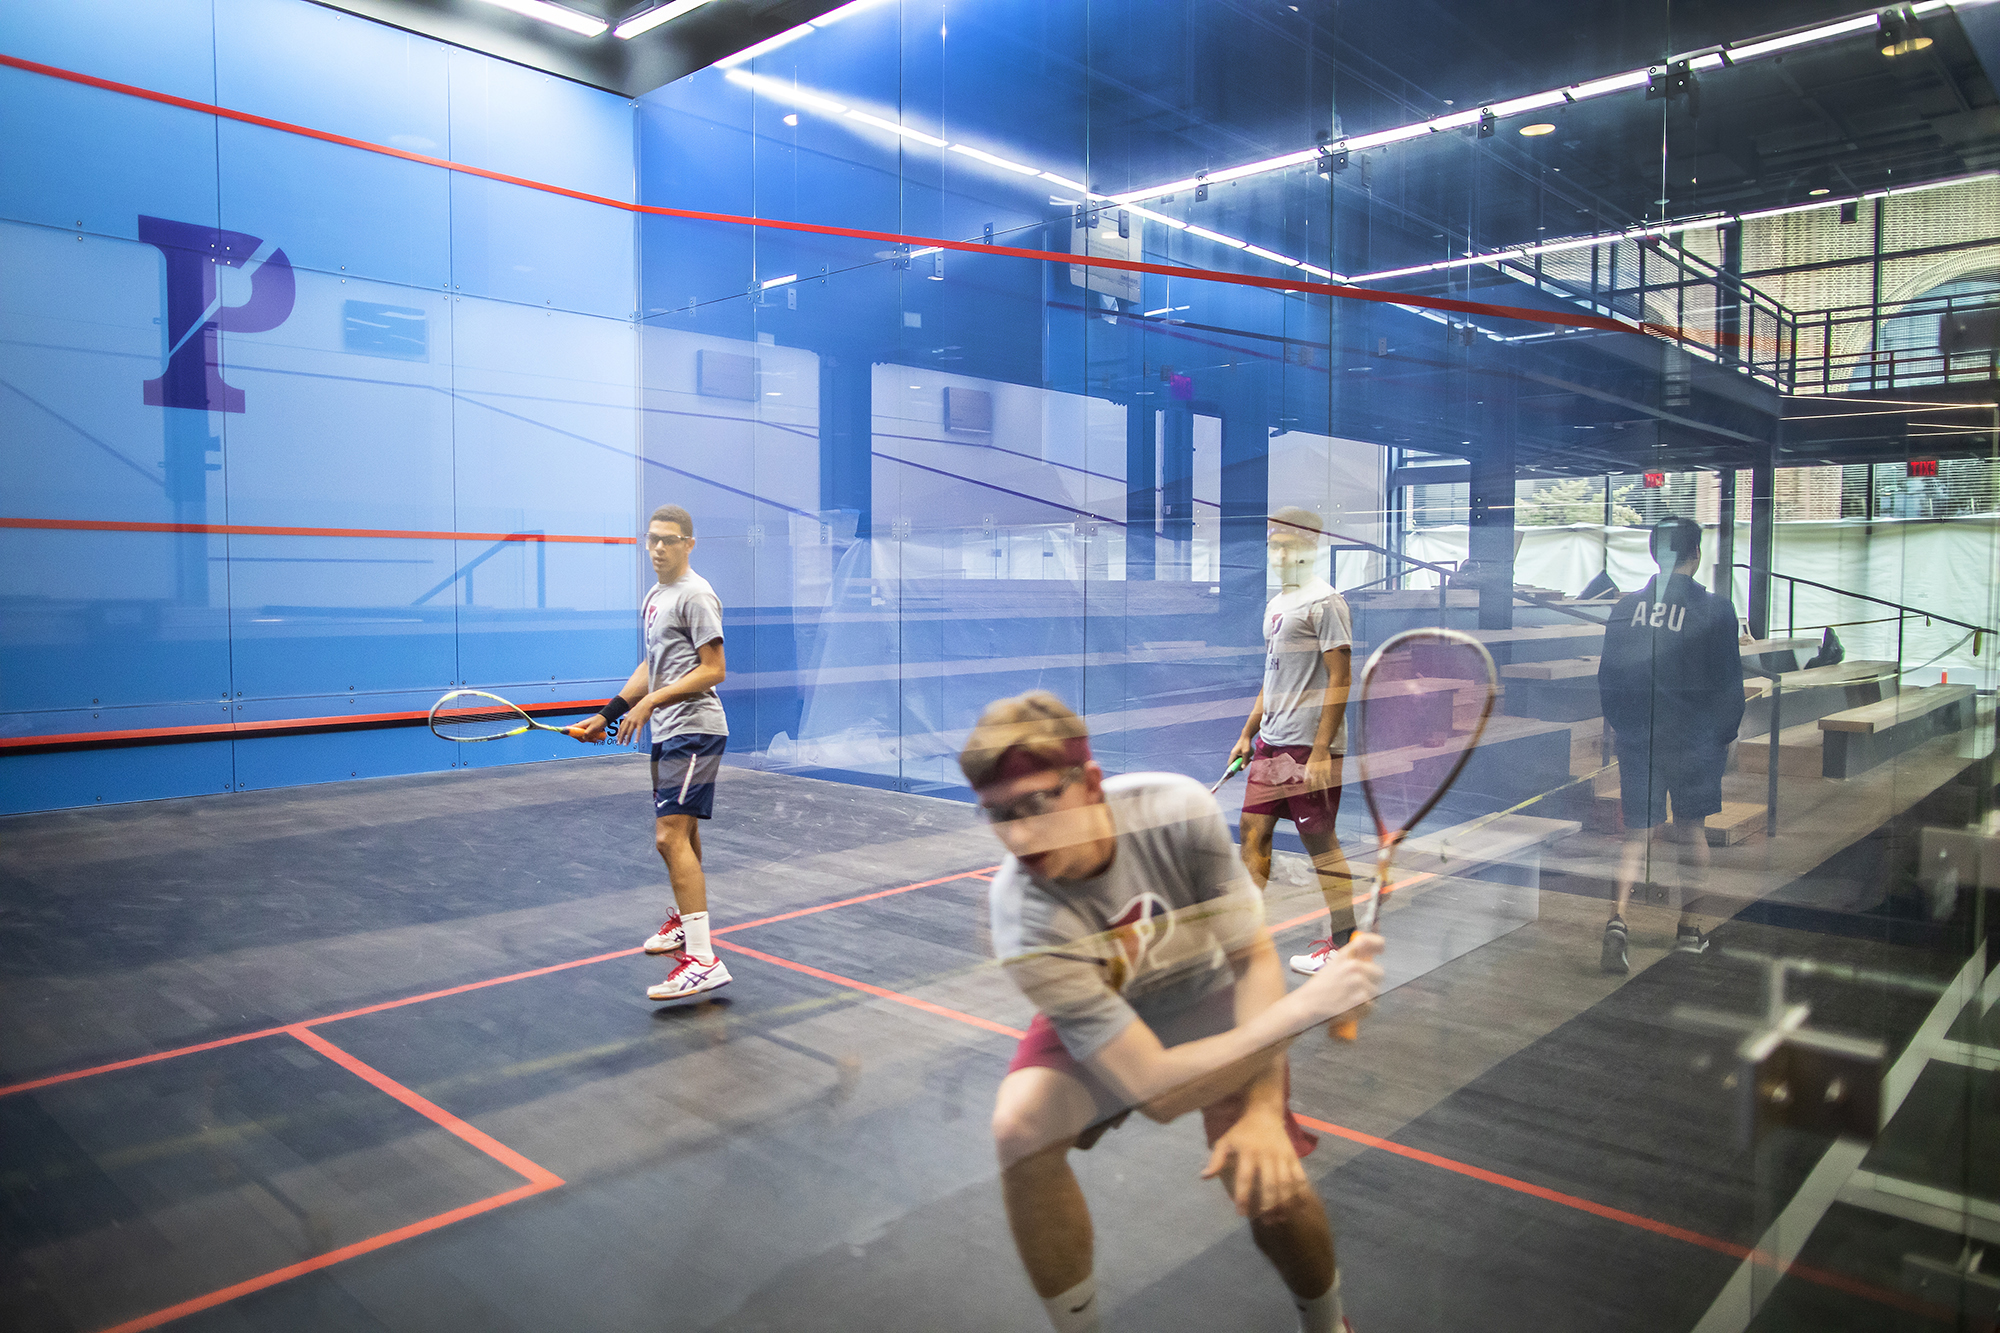 Three players practice in one of the glass courts at the new Penn Squash Center.